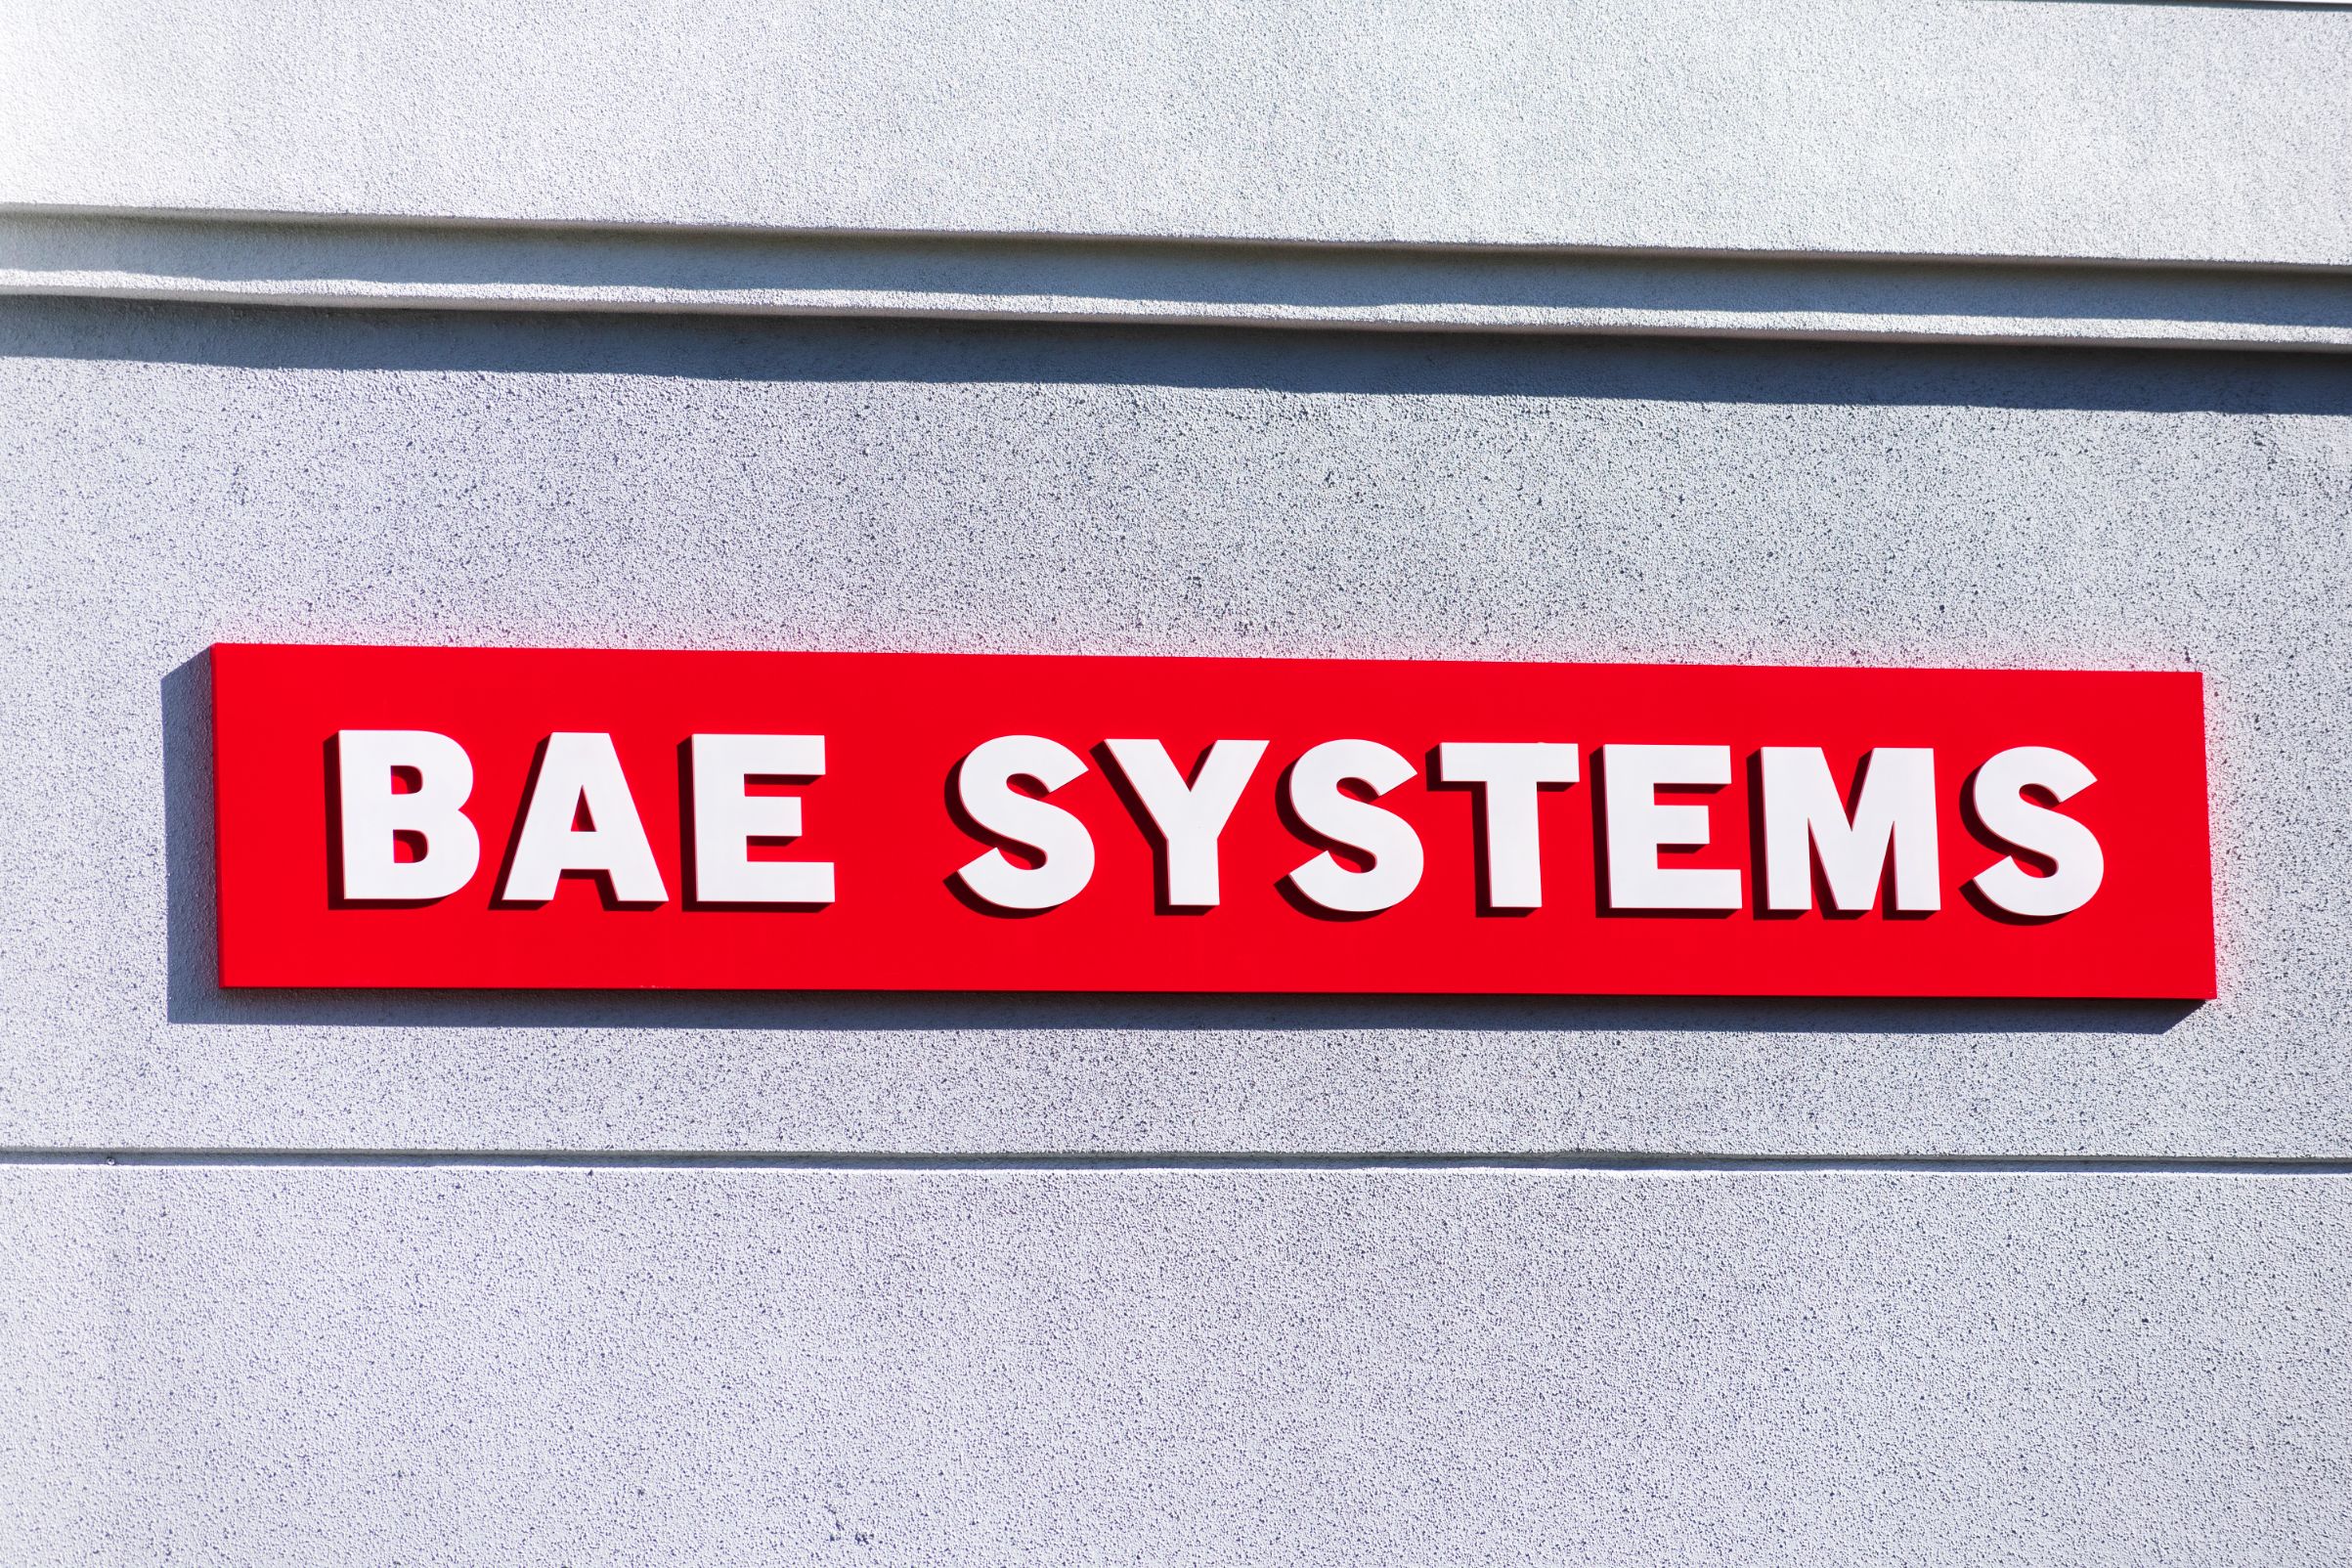 BAE Systems sign at British multinational arms, security, and aerospace company office in Silicon Valley - San Jose, California, USA - 2021